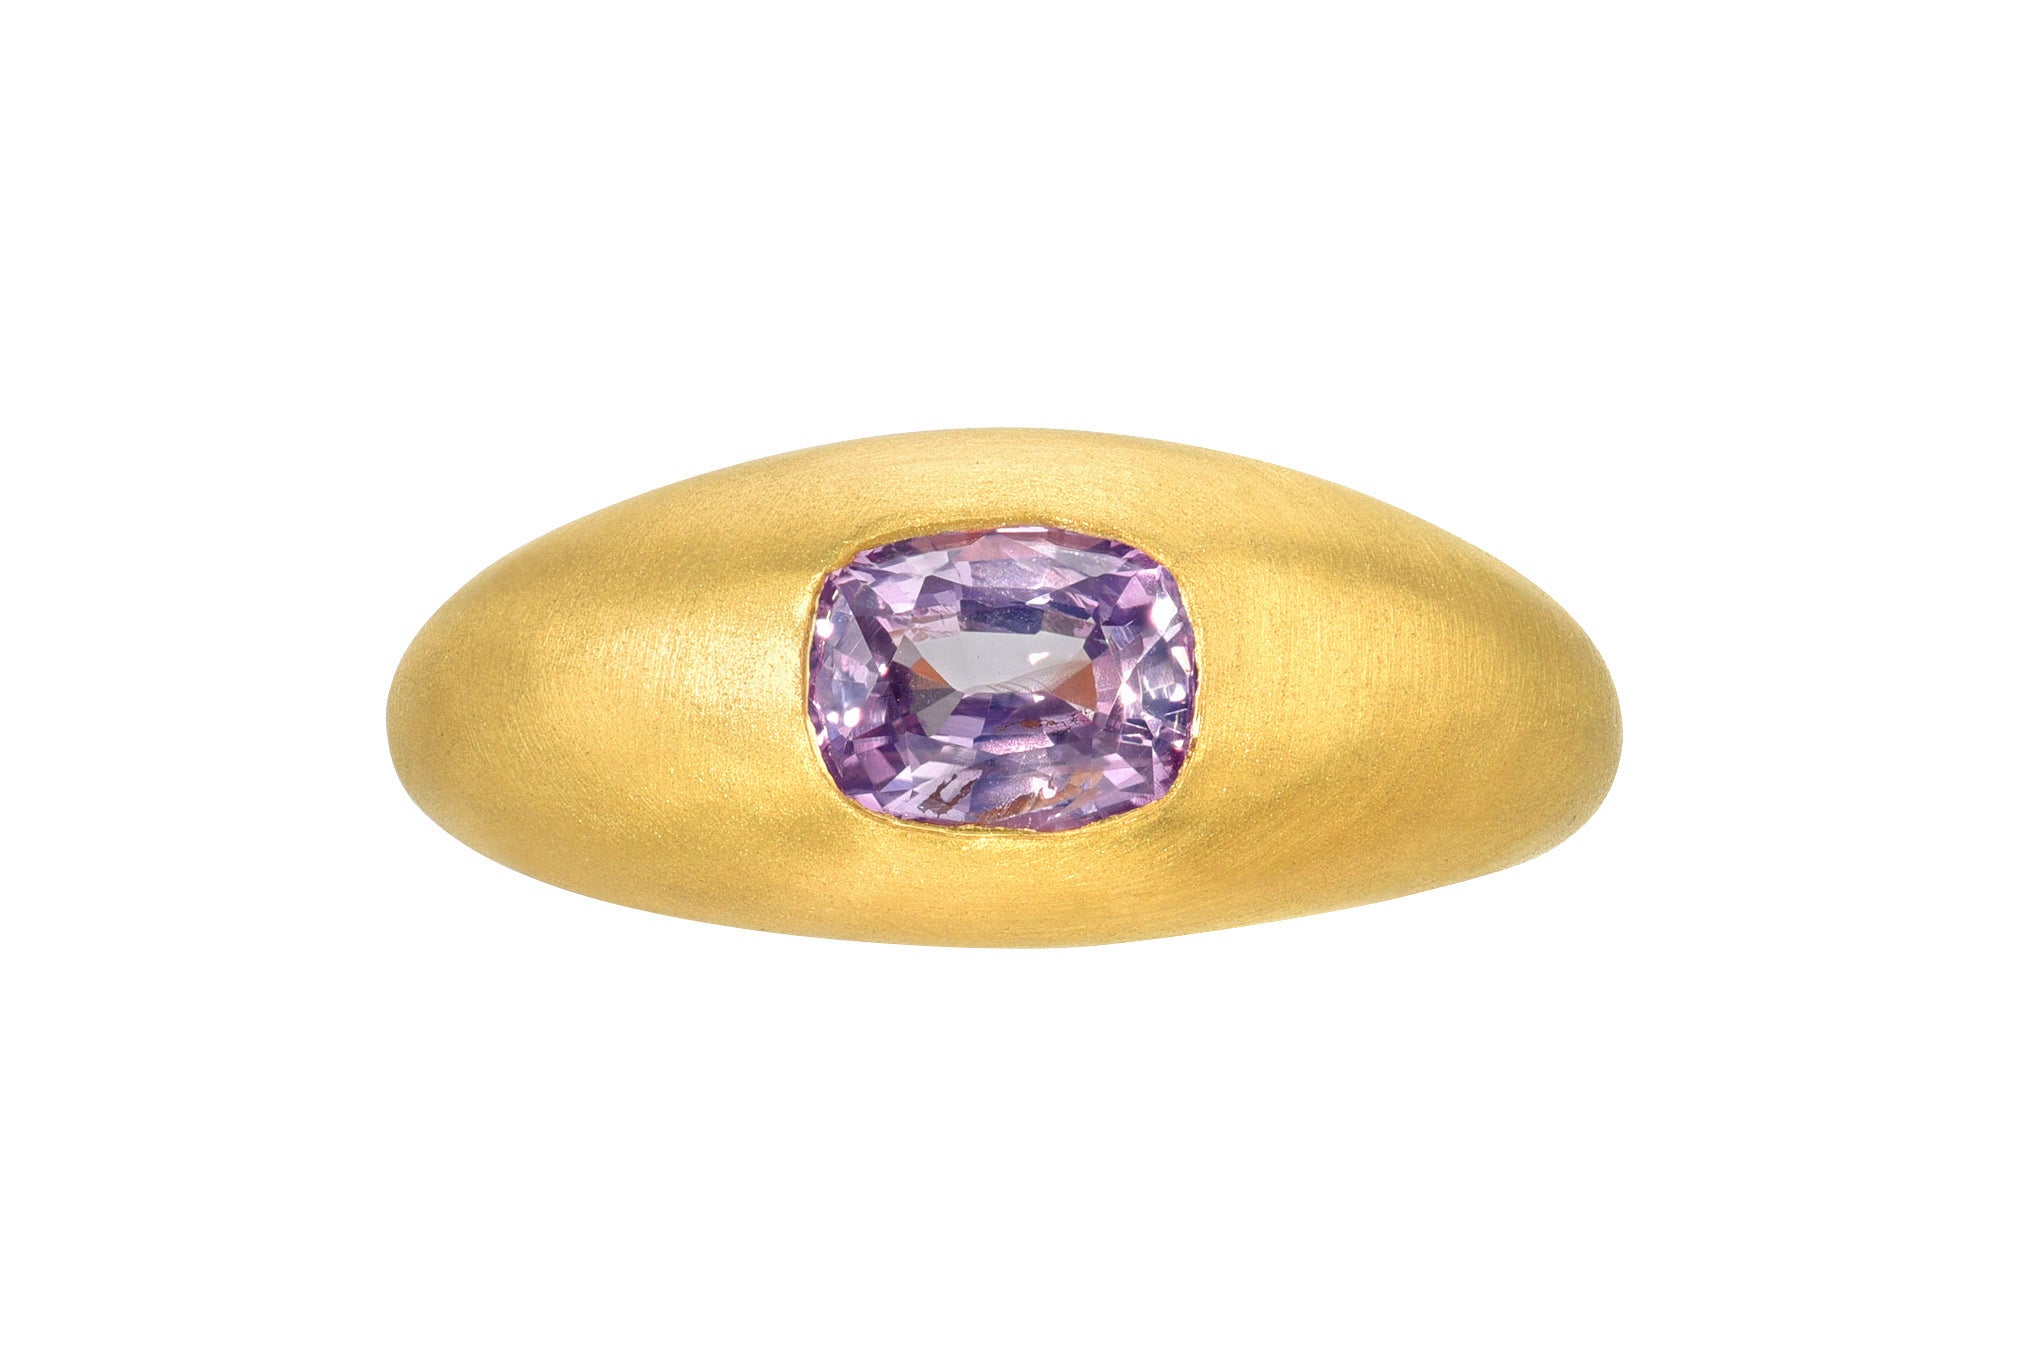 ONE OF A KIND LILAC SAPPHIRE GEM SIGNET RING